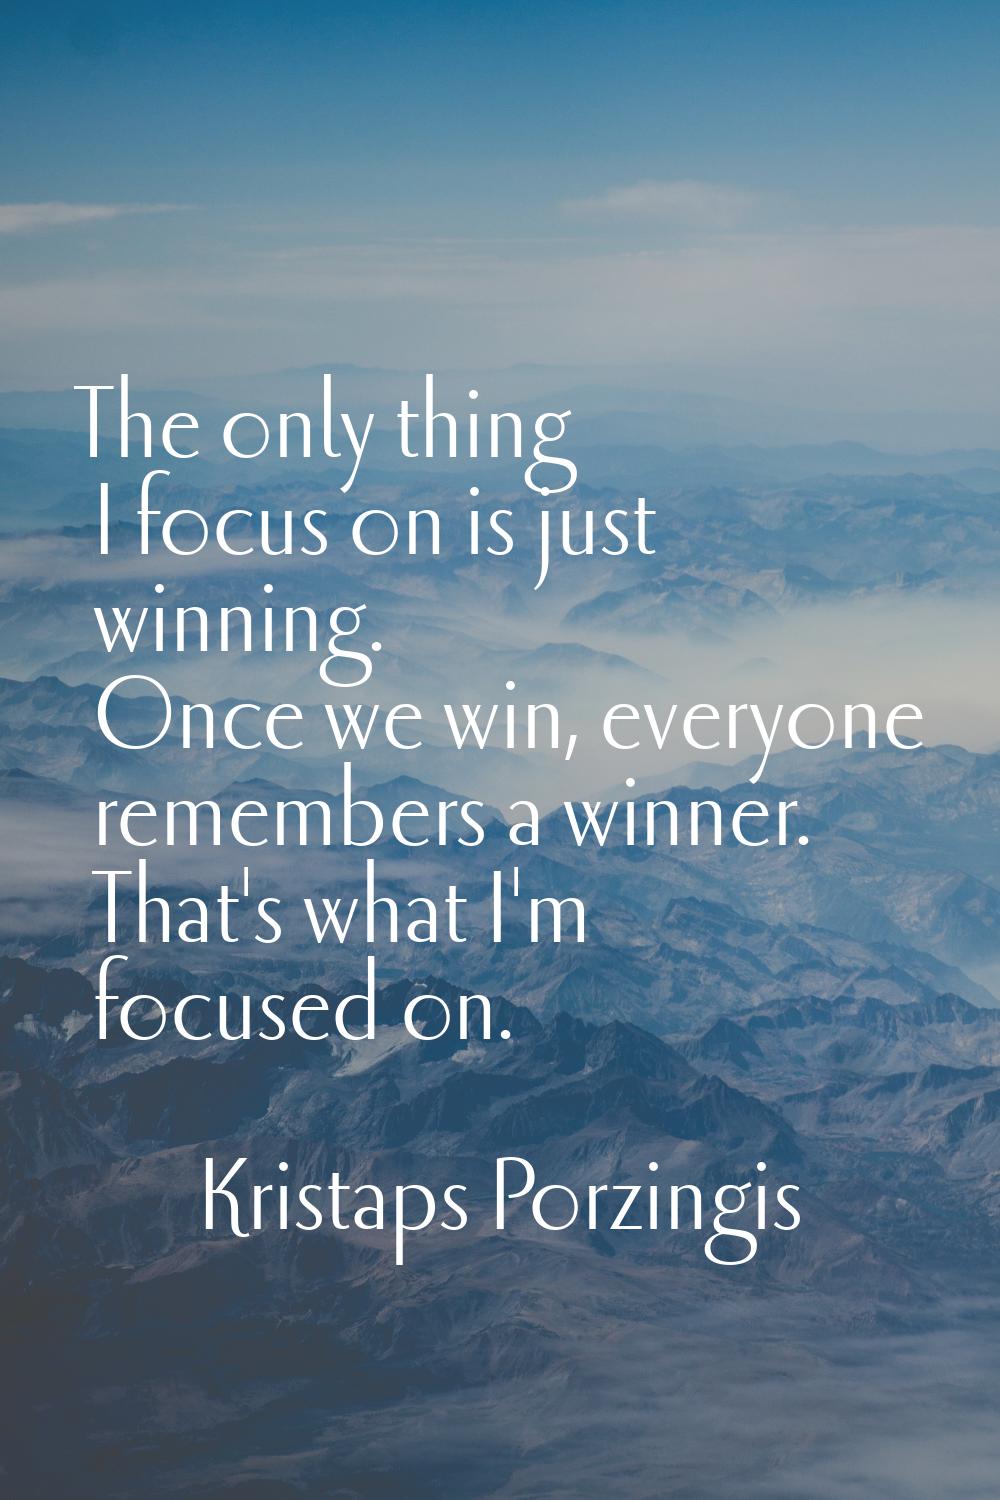 The only thing I focus on is just winning. Once we win, everyone remembers a winner. That's what I'